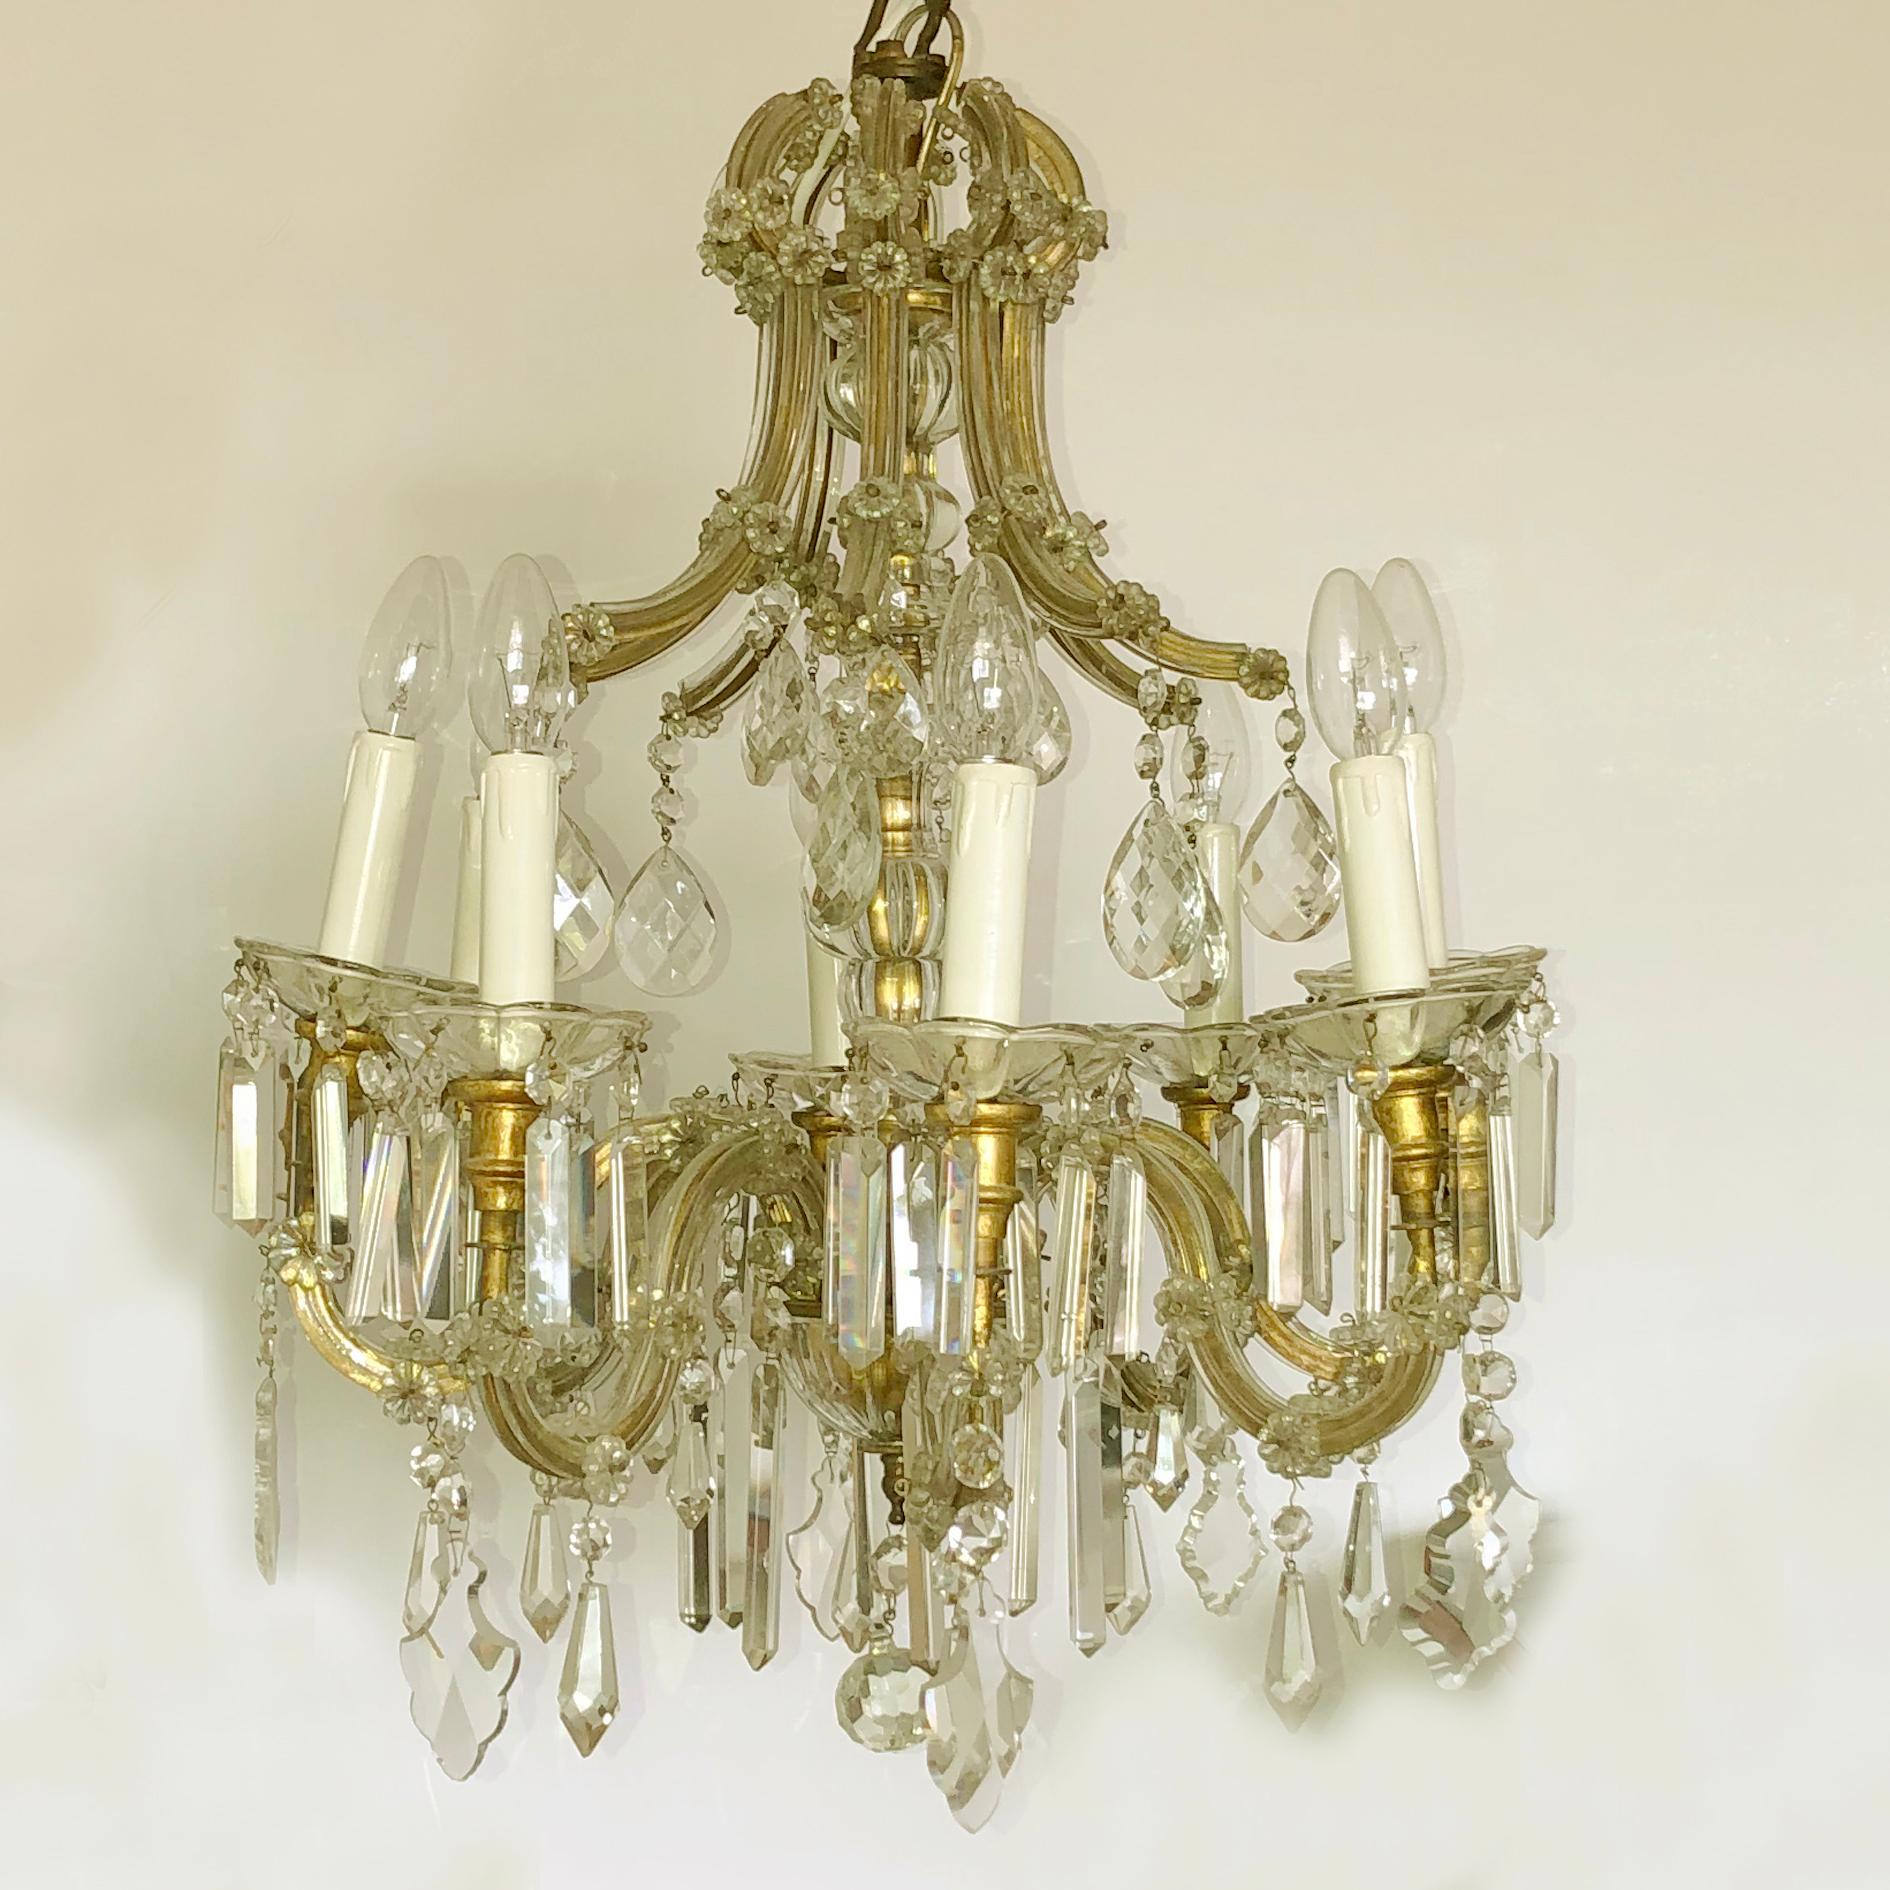 Nice rich Maria Theresa chandelier. Rewired and cleaned.
The height of the chandelier without the chain is 75 cm and has extra one meter of chain (Total 175 cm).
European Edison E14 fittings. Please allow additional week for complimentary US